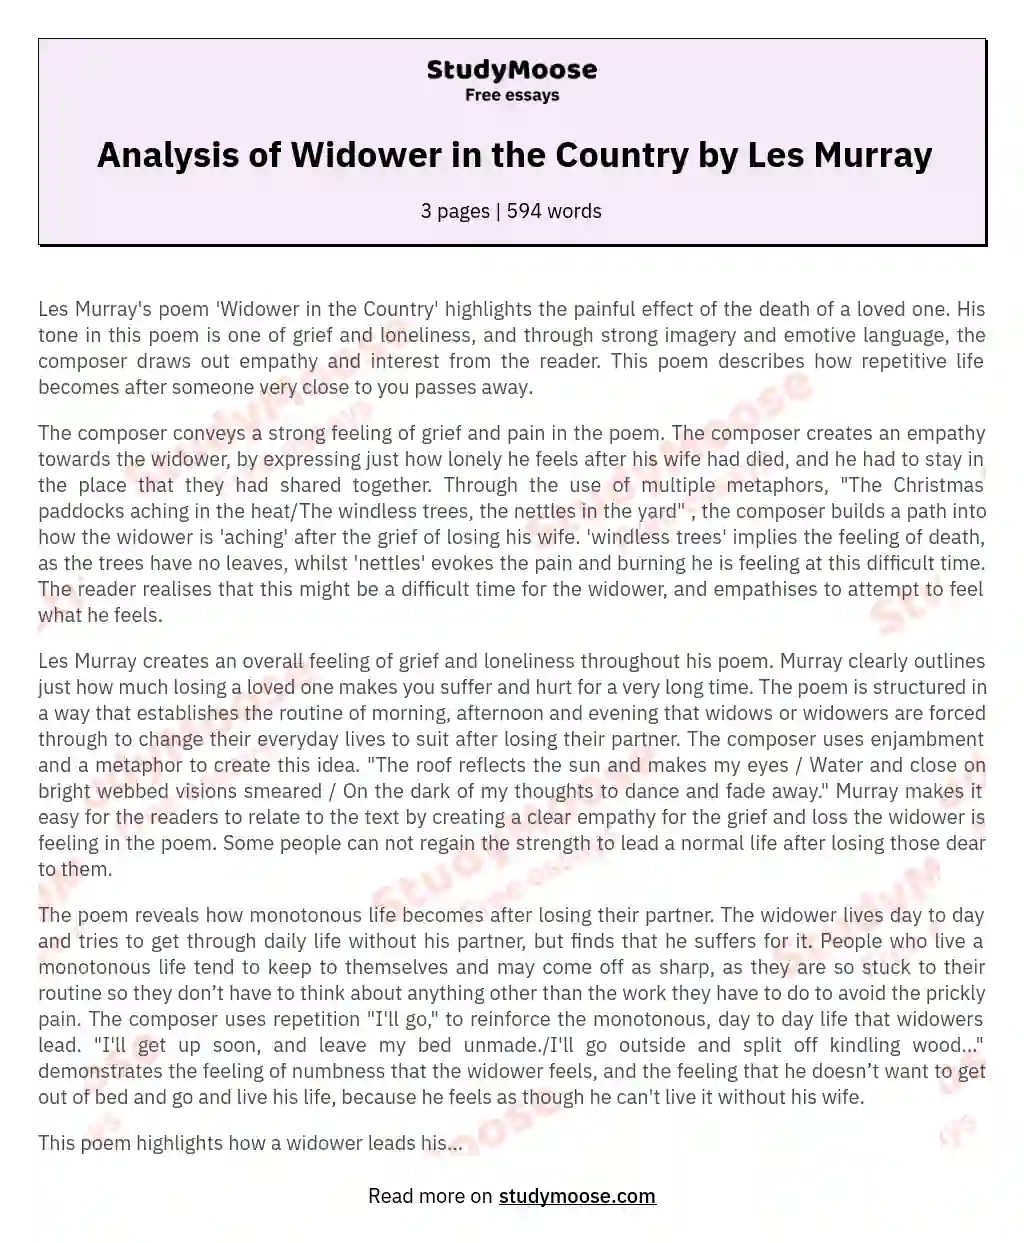 Analysis of Widower in the Country by Les Murray essay